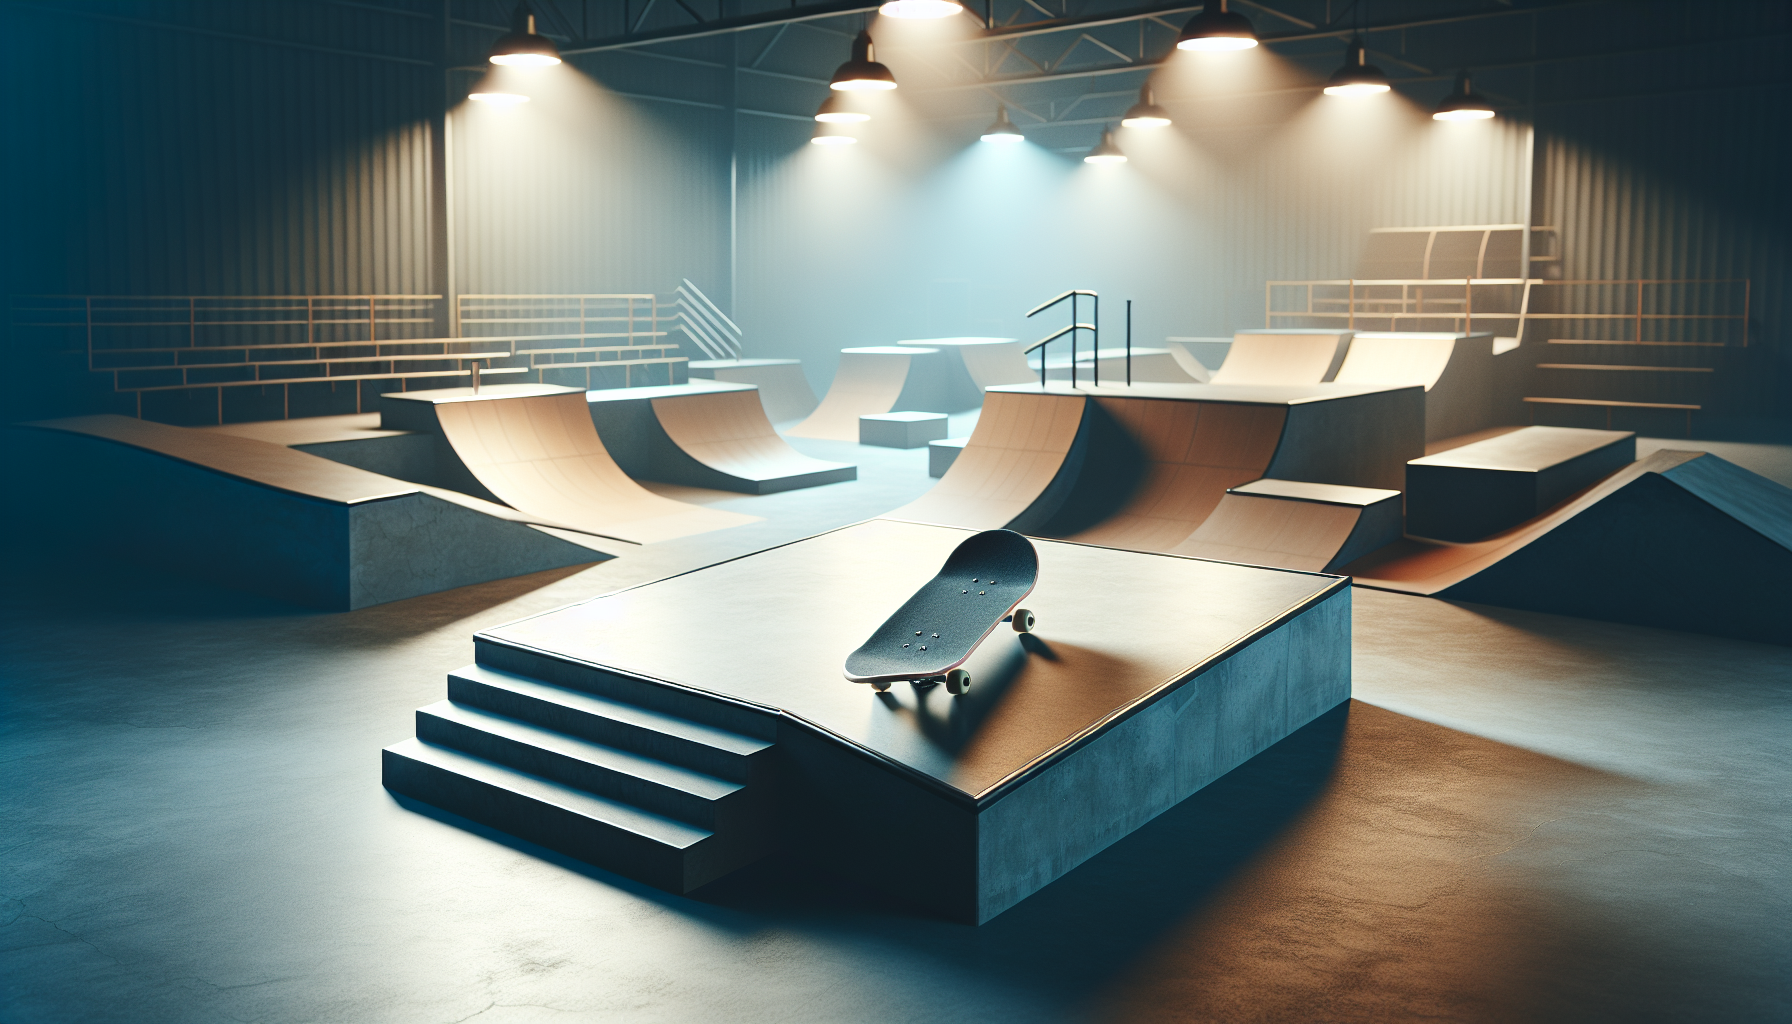 How Do You Adjust To Different Skate Park Features And Adapt Your Approach?